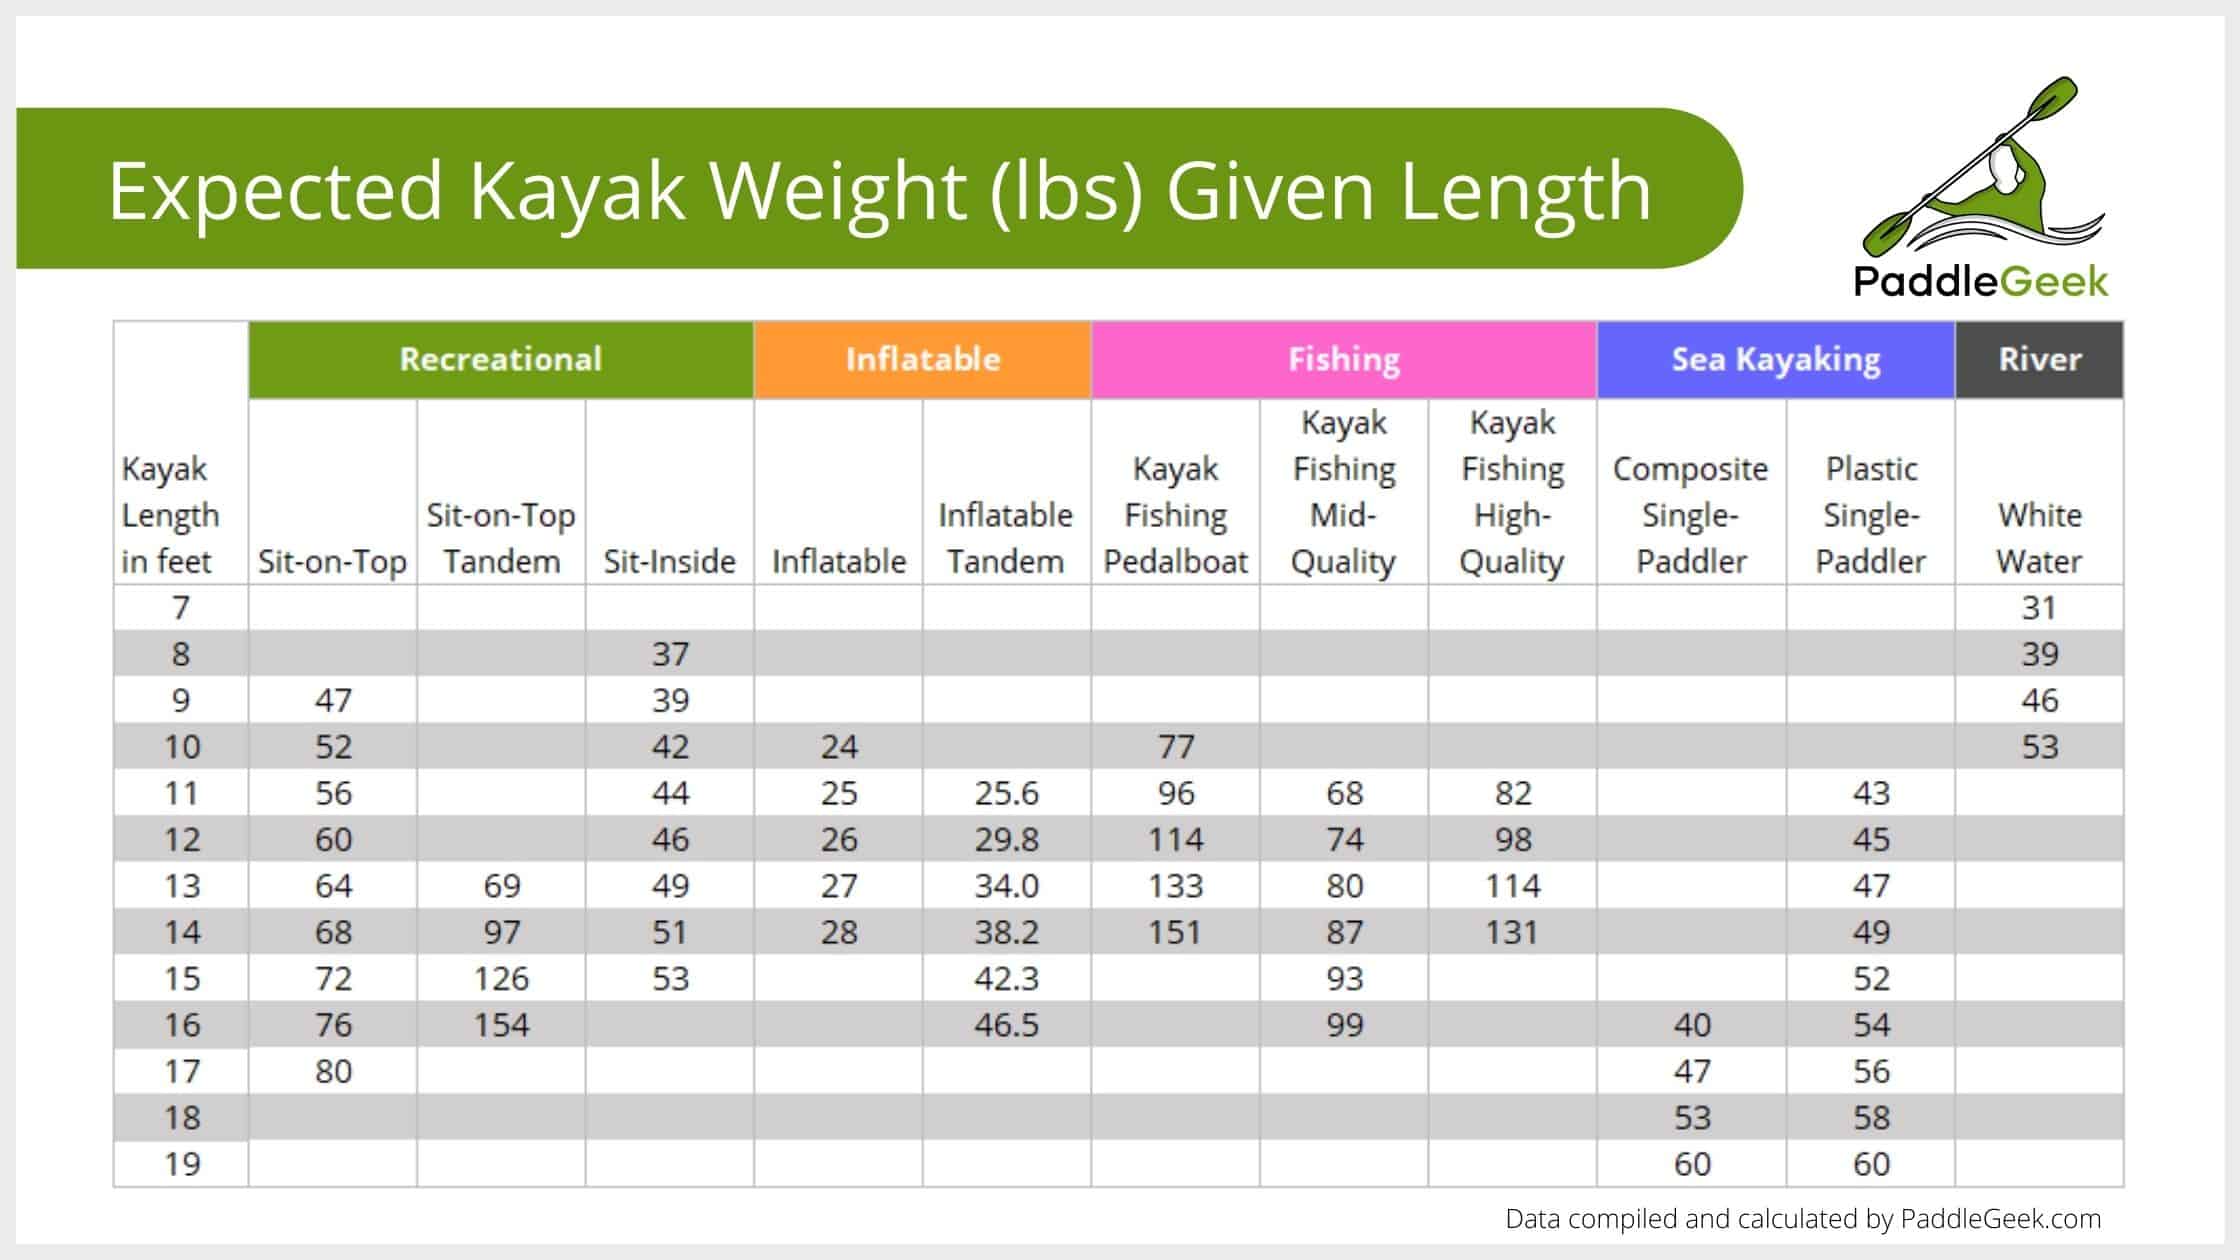 Expected Kayak Weight Given Length